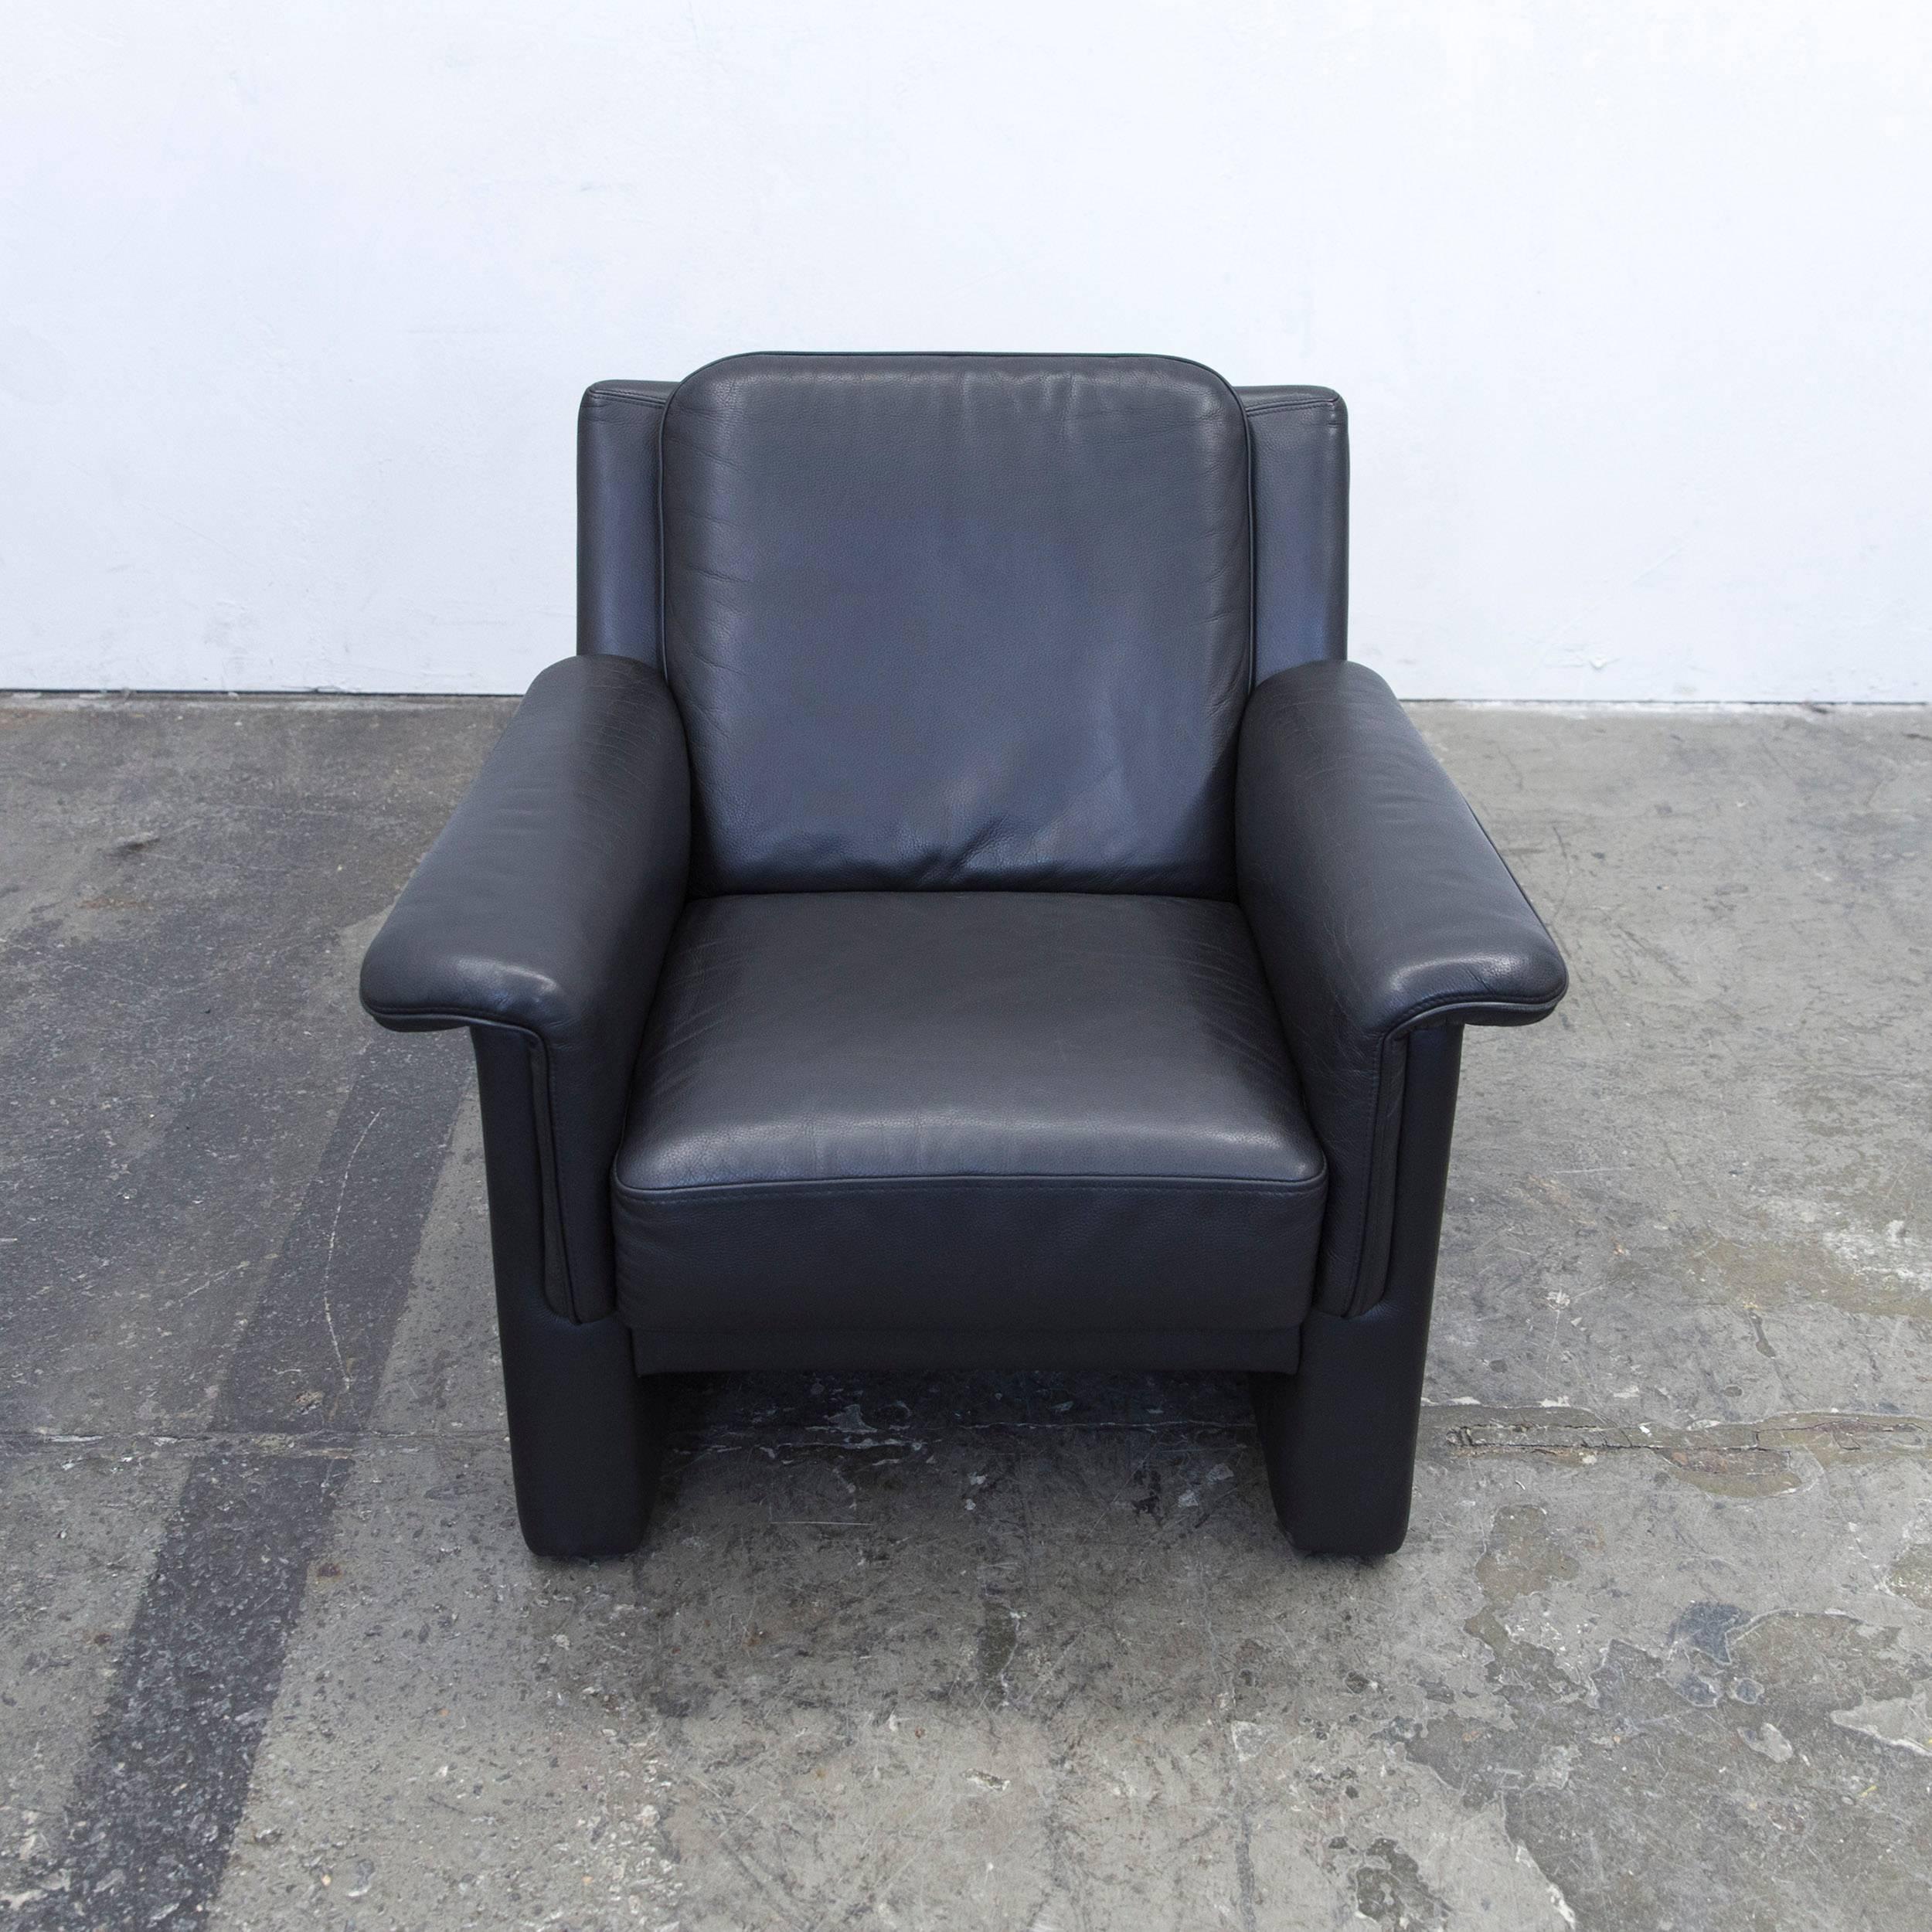 German Brühl & Sippold Designer Armchair Leather Black One Seat Couch Modern